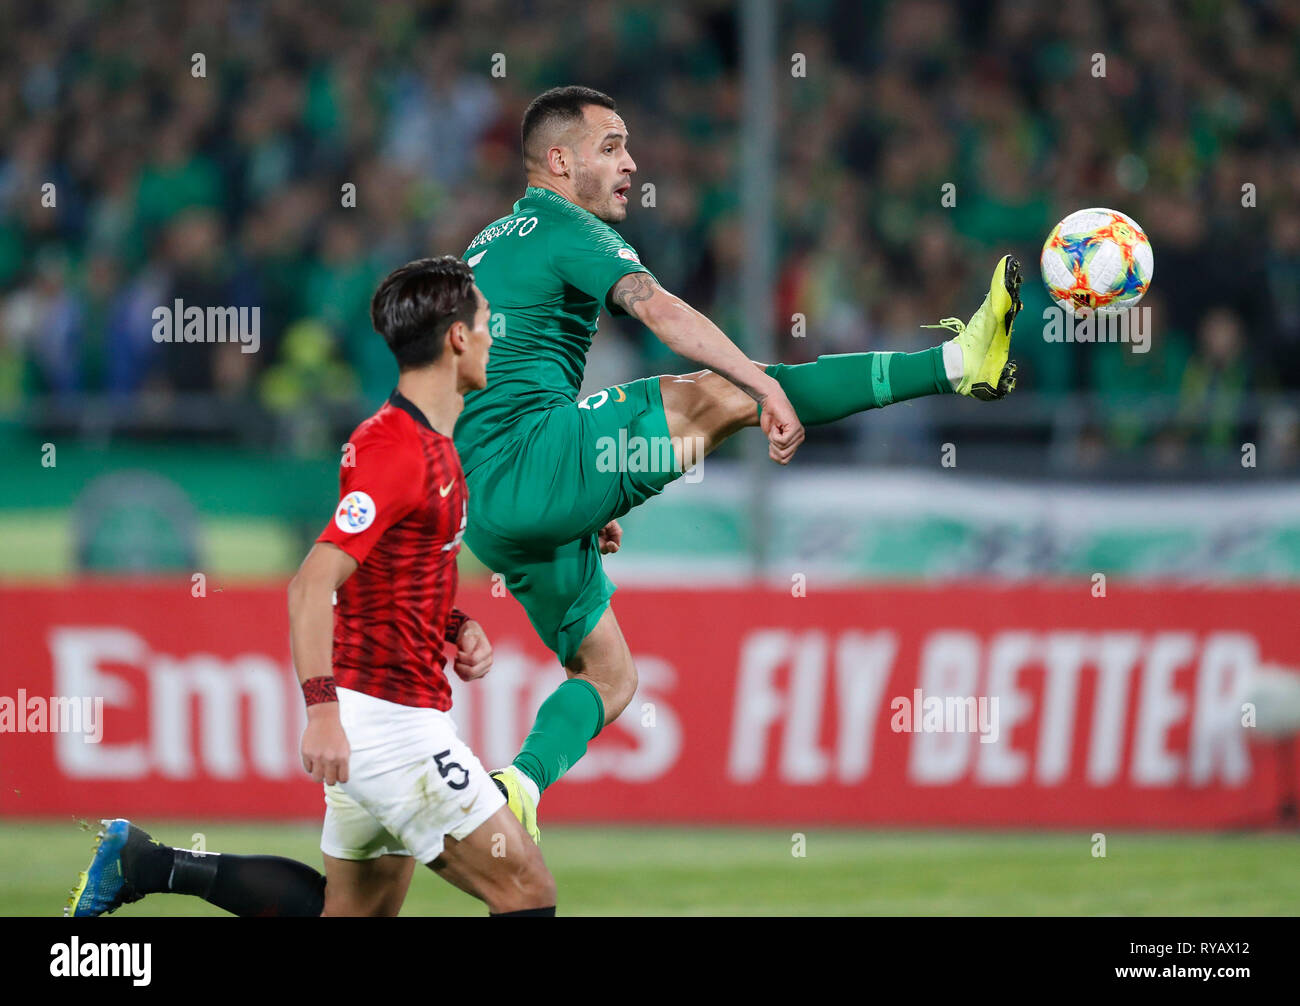 Beijing, China. 13th Mar, 2019. Beijing Guoan's Renato Augusto (R) competes during the group G match between Beijing Guoan FC and Urawa Red Diamonds at the 2019 AFC Champions League in Beijing, capital of China, March 13, 2019. The match ended in a 0-0 draw. Credit: Ding Xu/Xinhua/Alamy Live News Stock Photo